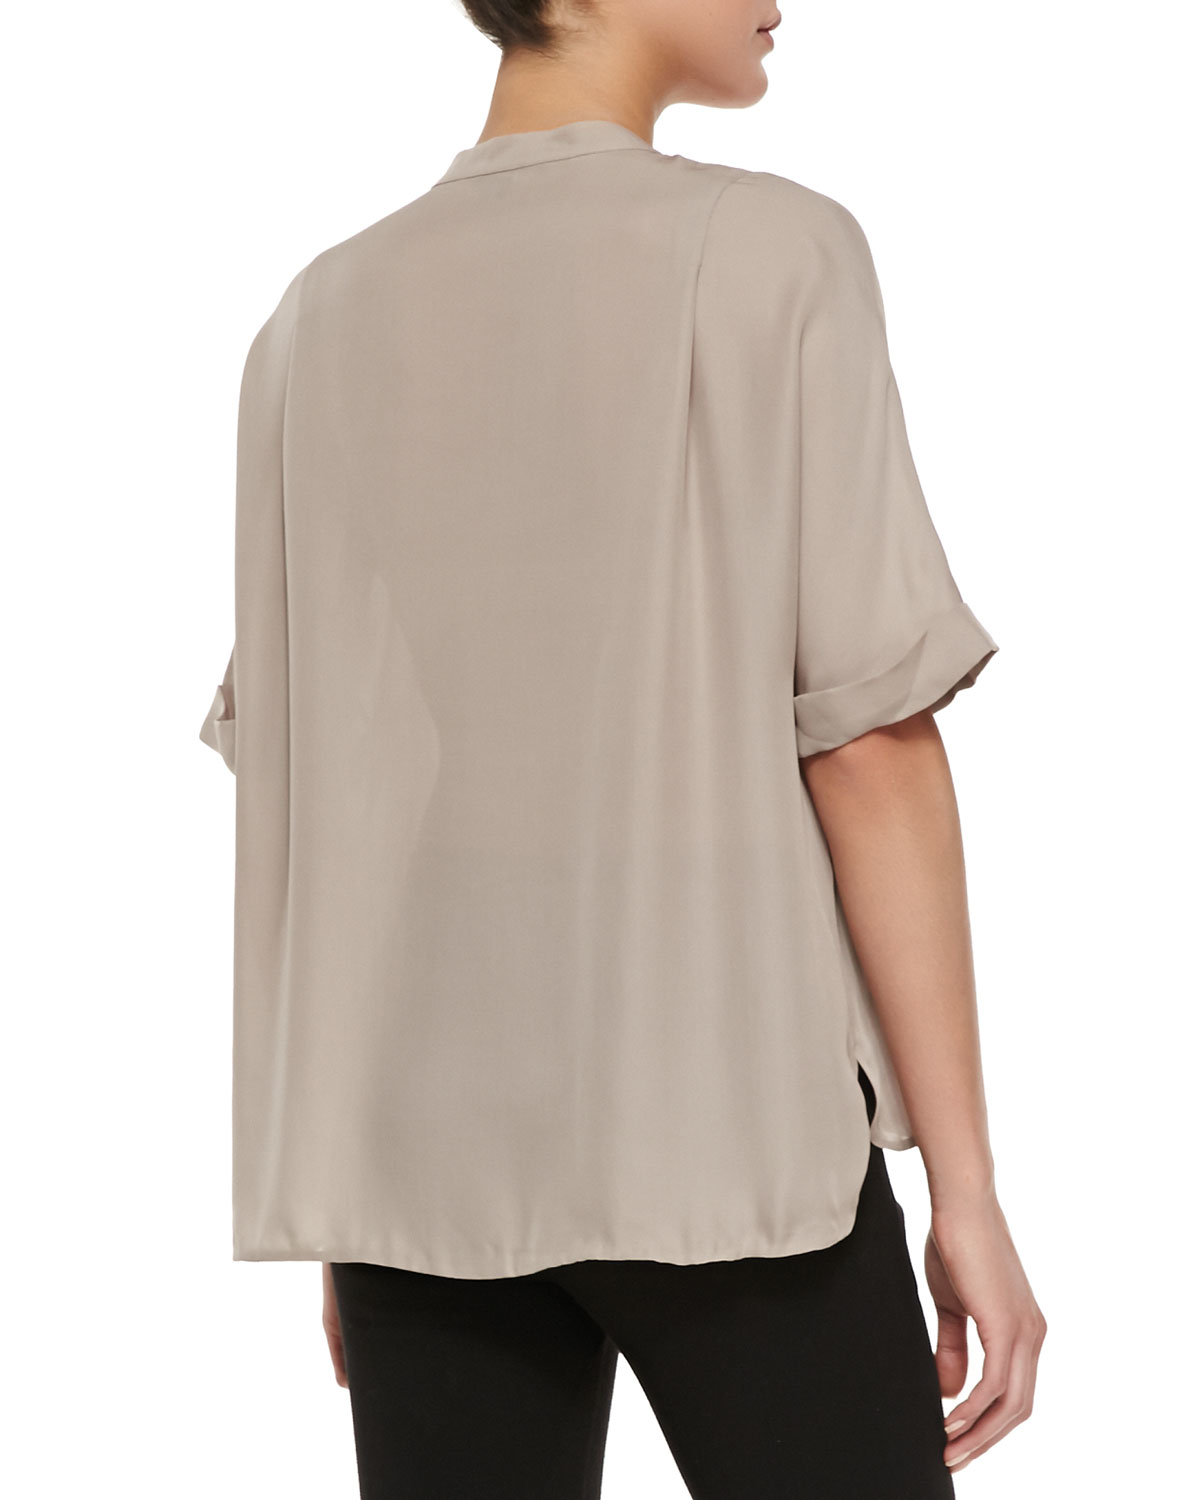 Lyst - Vince Contrast-trim Half-sleeve Blouse in Natural